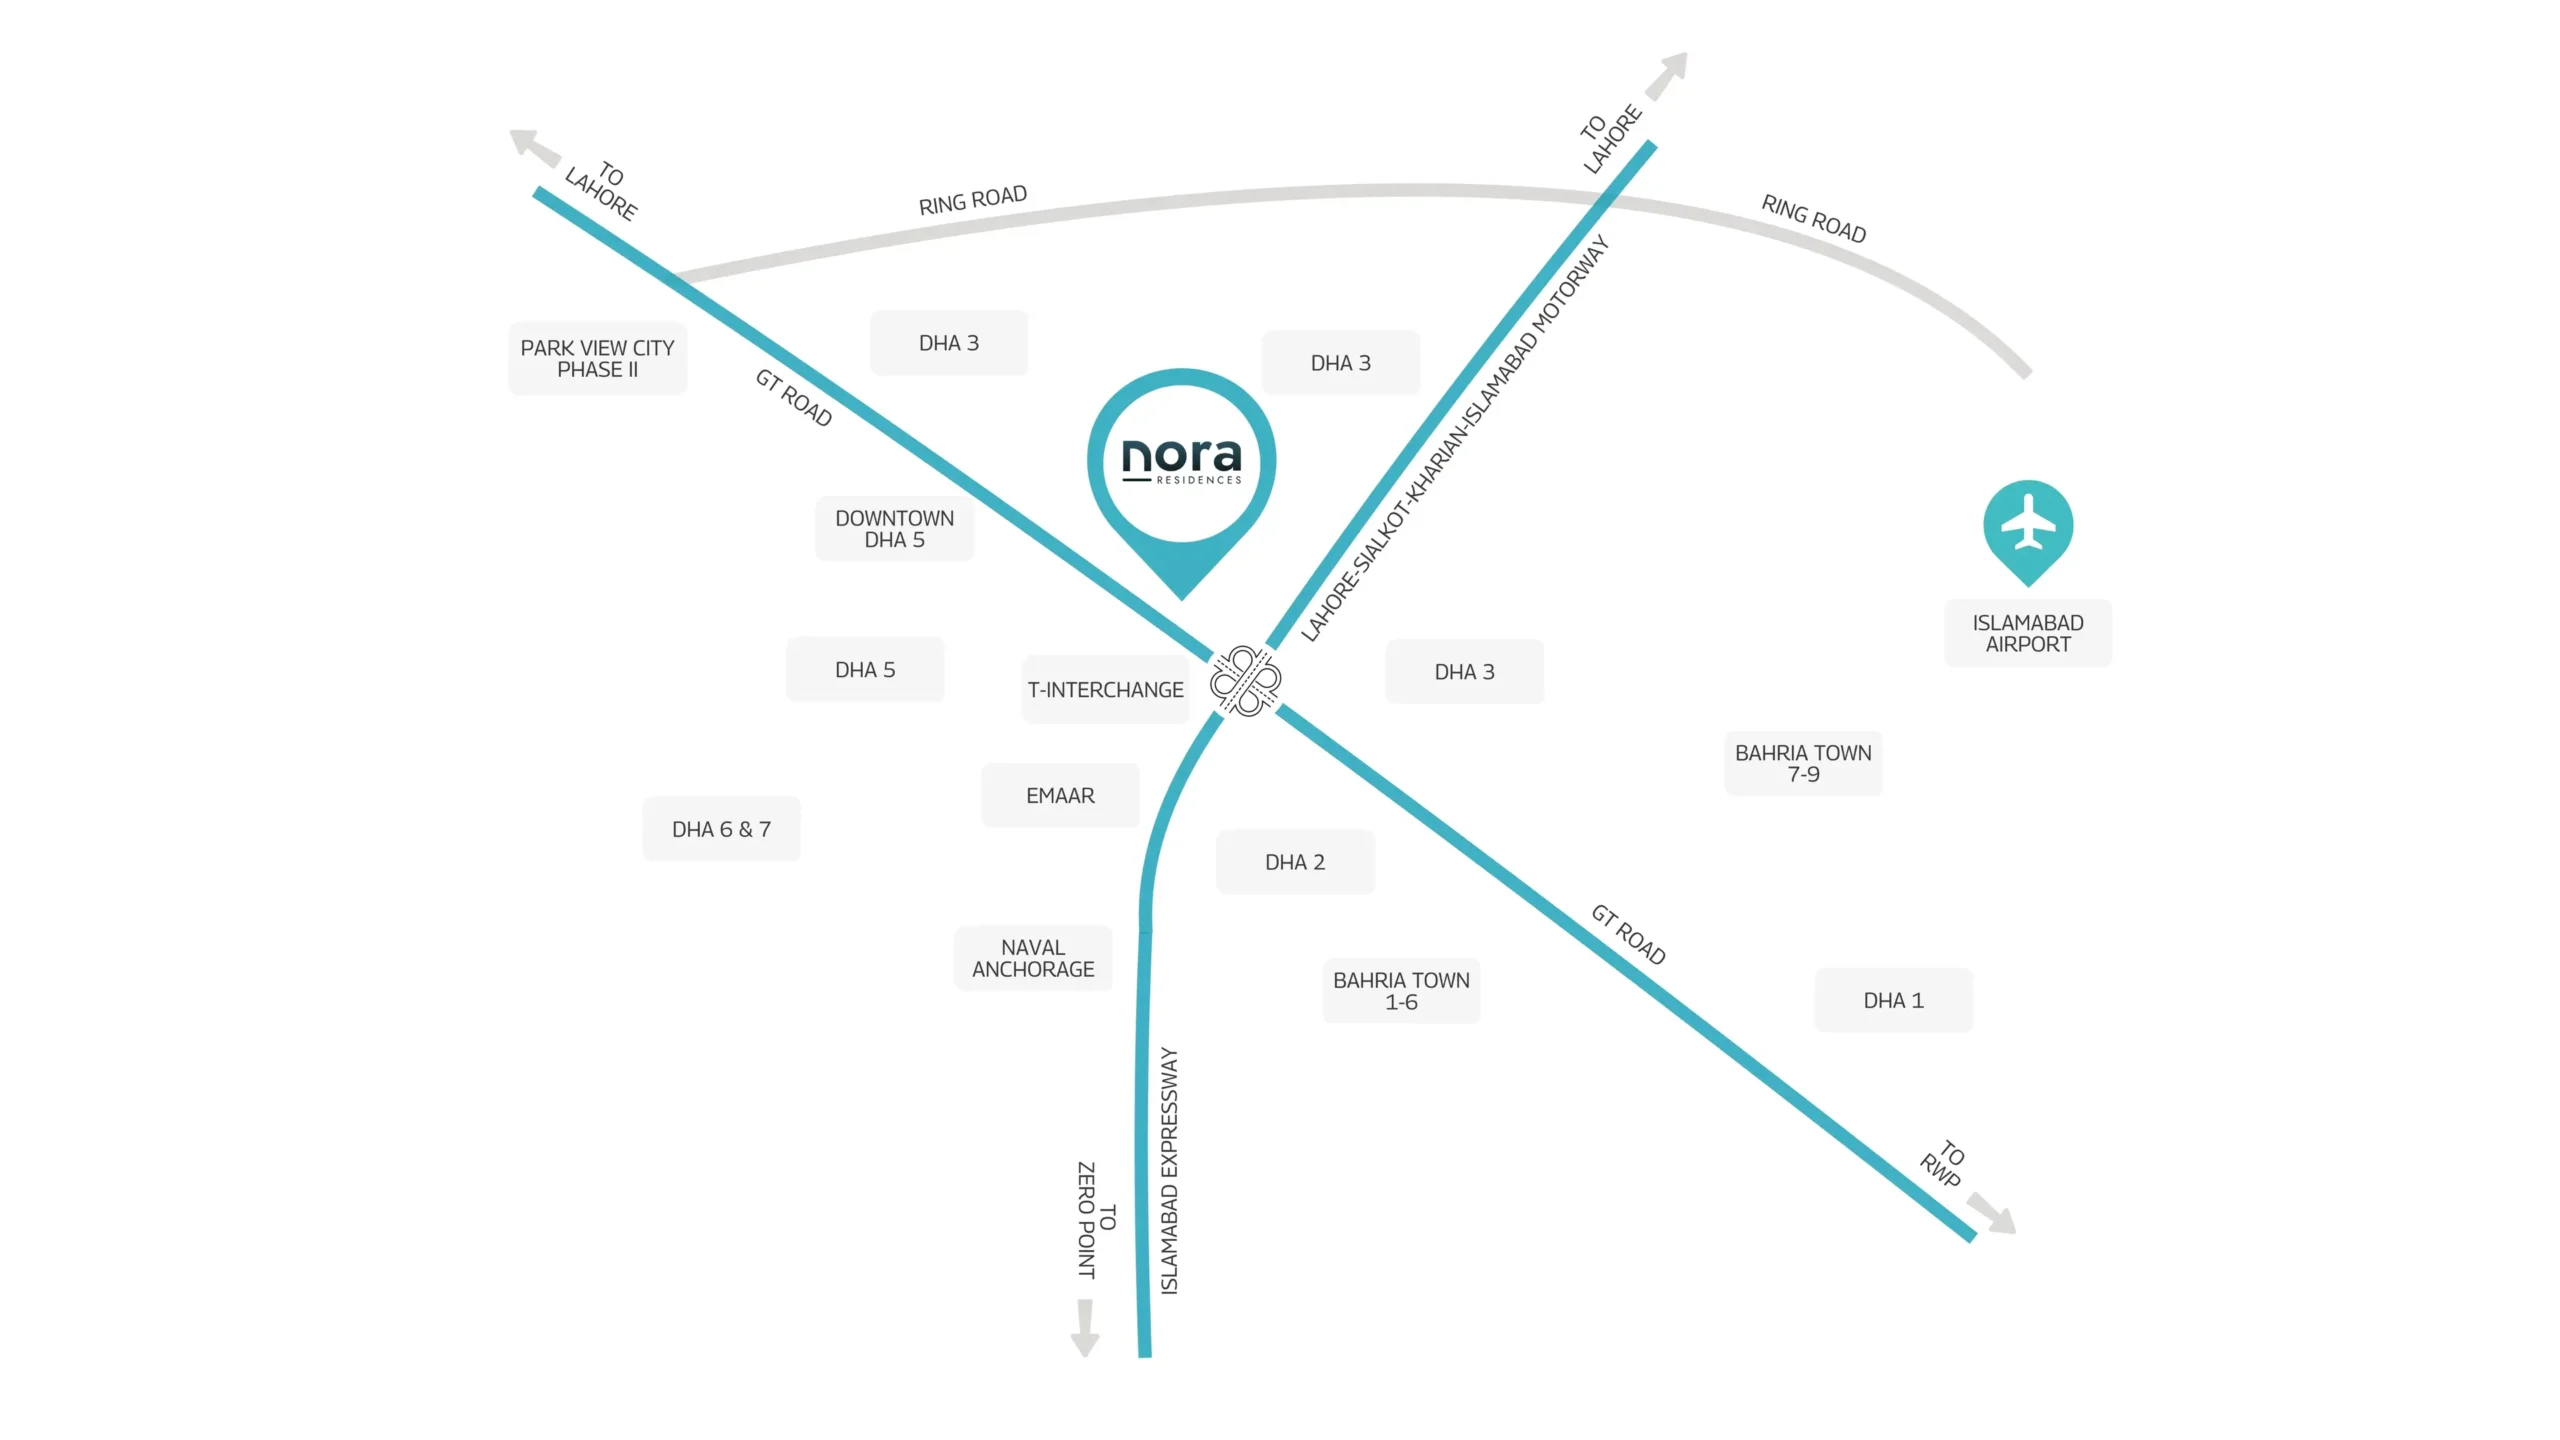 NORA Residences Located on Main G ROad near Giga Mall, Emaar, DHA Phase 2, DHA Phase 3, DHA Phase 5, Park View City Phase 2